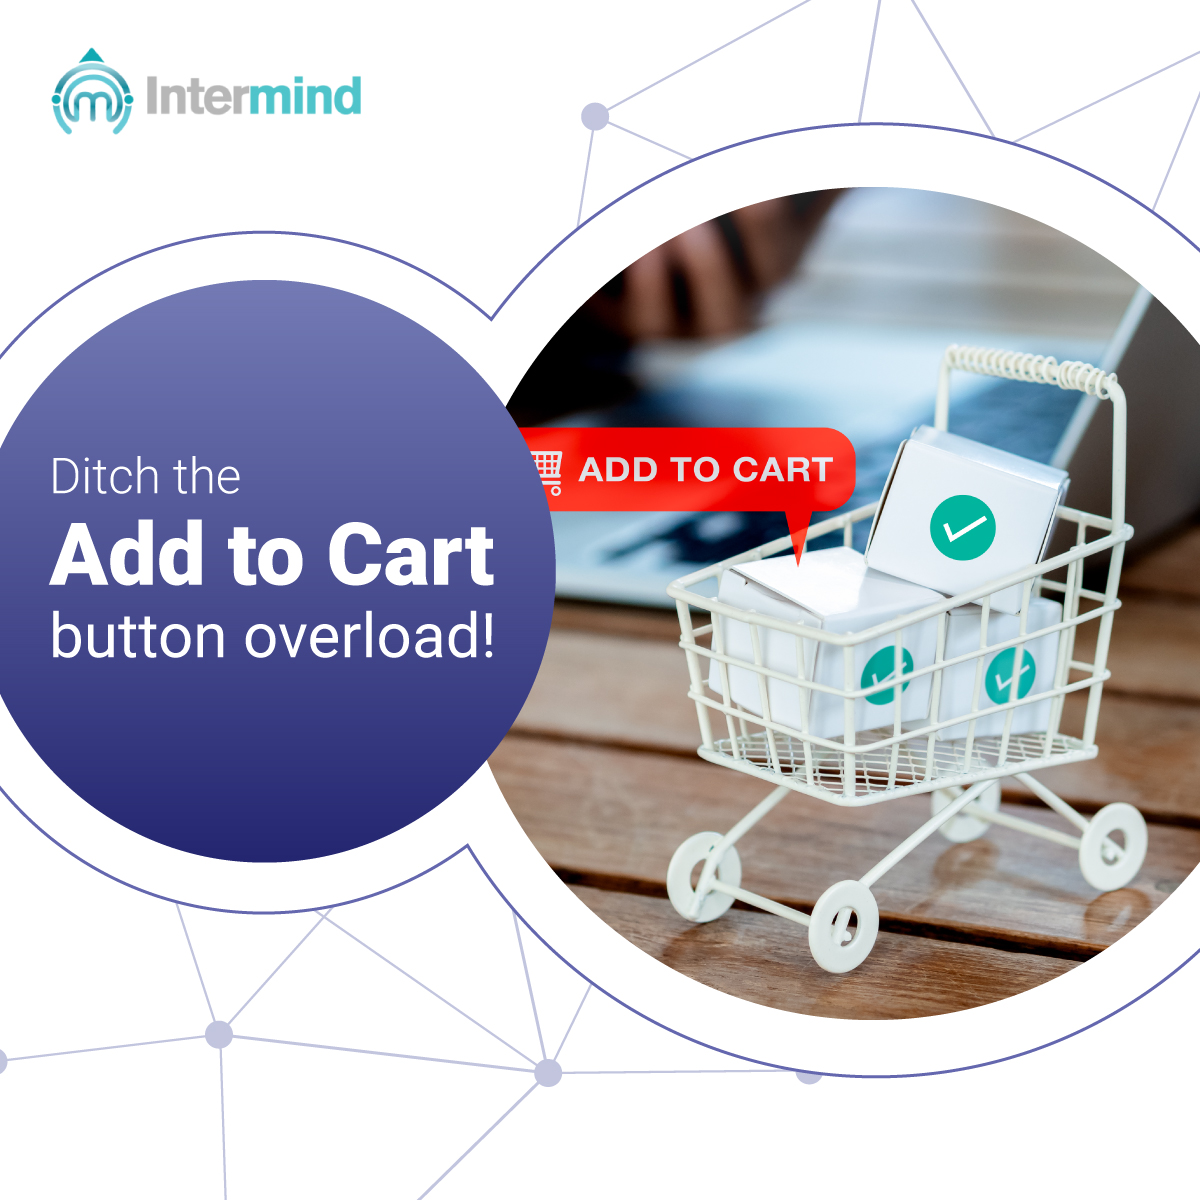 • Ditch the 'Add to Cart' button overload!
• Streamline checkout with one-click payments.
• Boost conversions & make customers happy!
#ecommercetips #conversionhacks #shoppingexperience